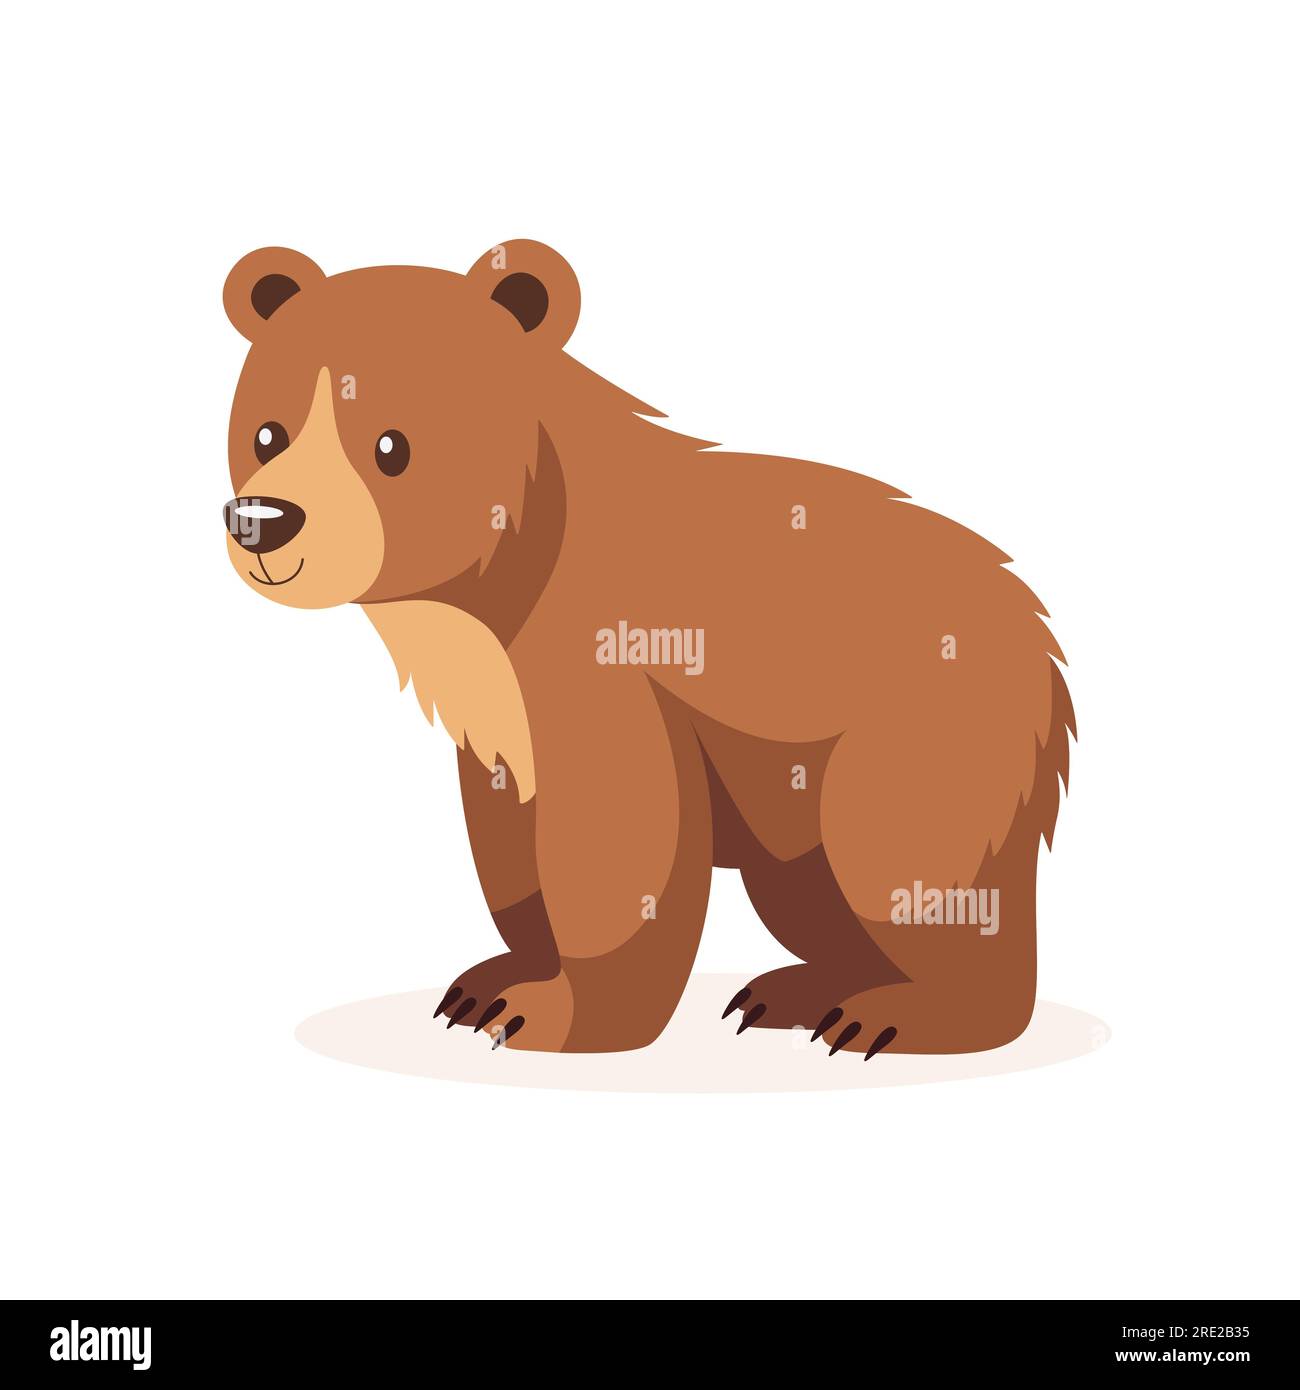 Flat Vector Cute Wild Animal - Grizzly Bear. Forest Cartoon Brown Smiling Bear in Side View. Woodland Animal Design Template Stock Vector